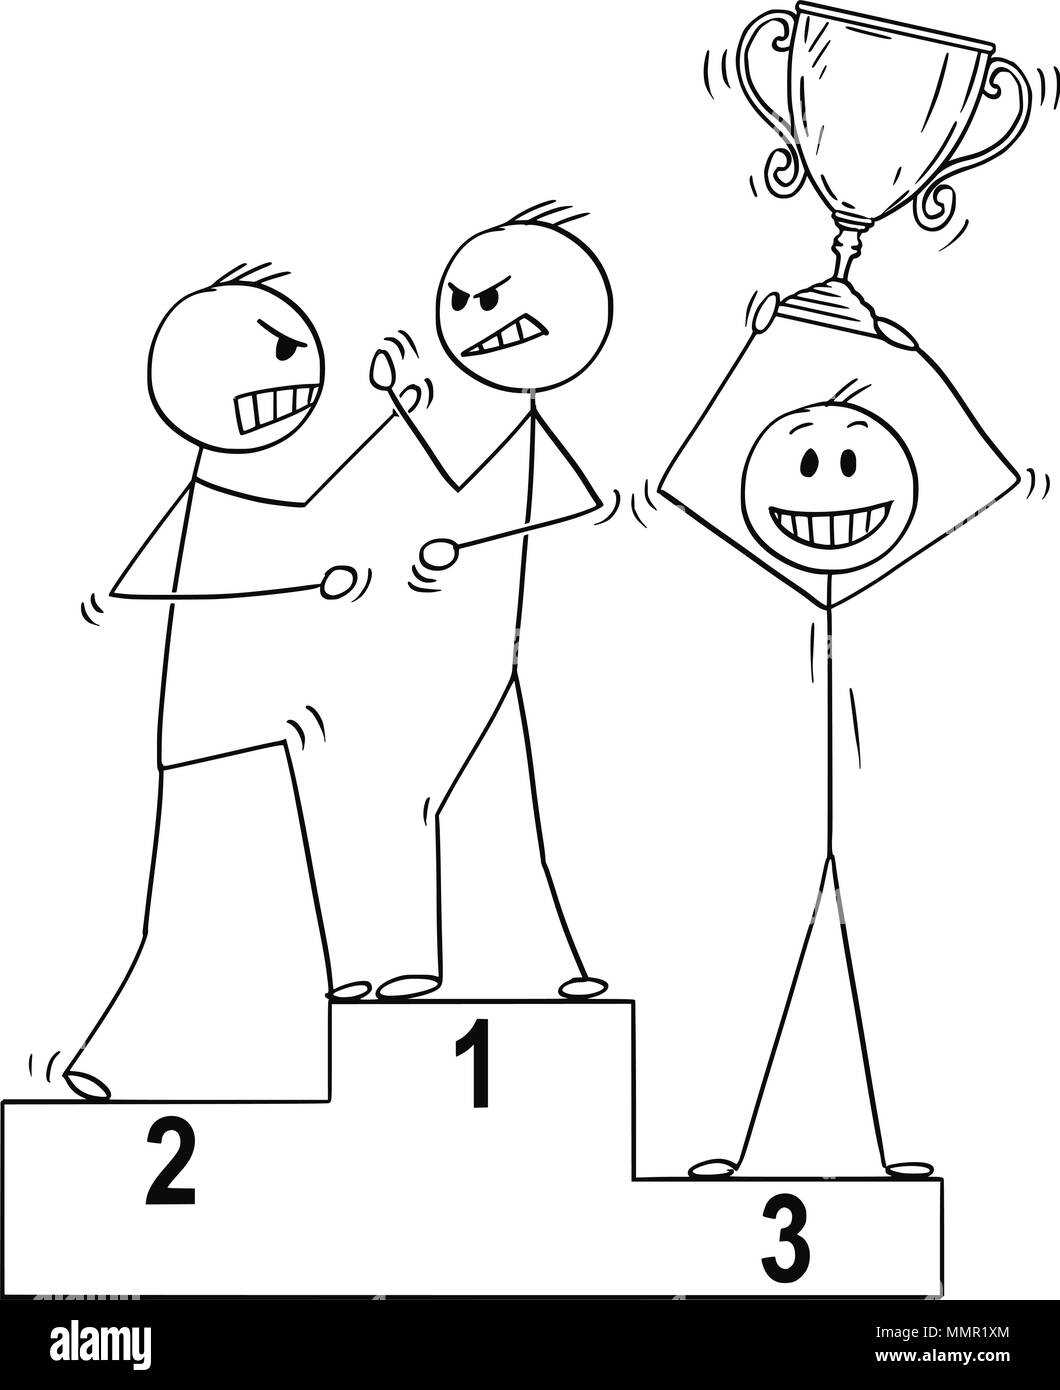 Cartoon of Three Man on Sport Winners Podium, Two of Them Are Fighting or Arguing, Third One is Celebrating With Trophy Cup Stock Vector